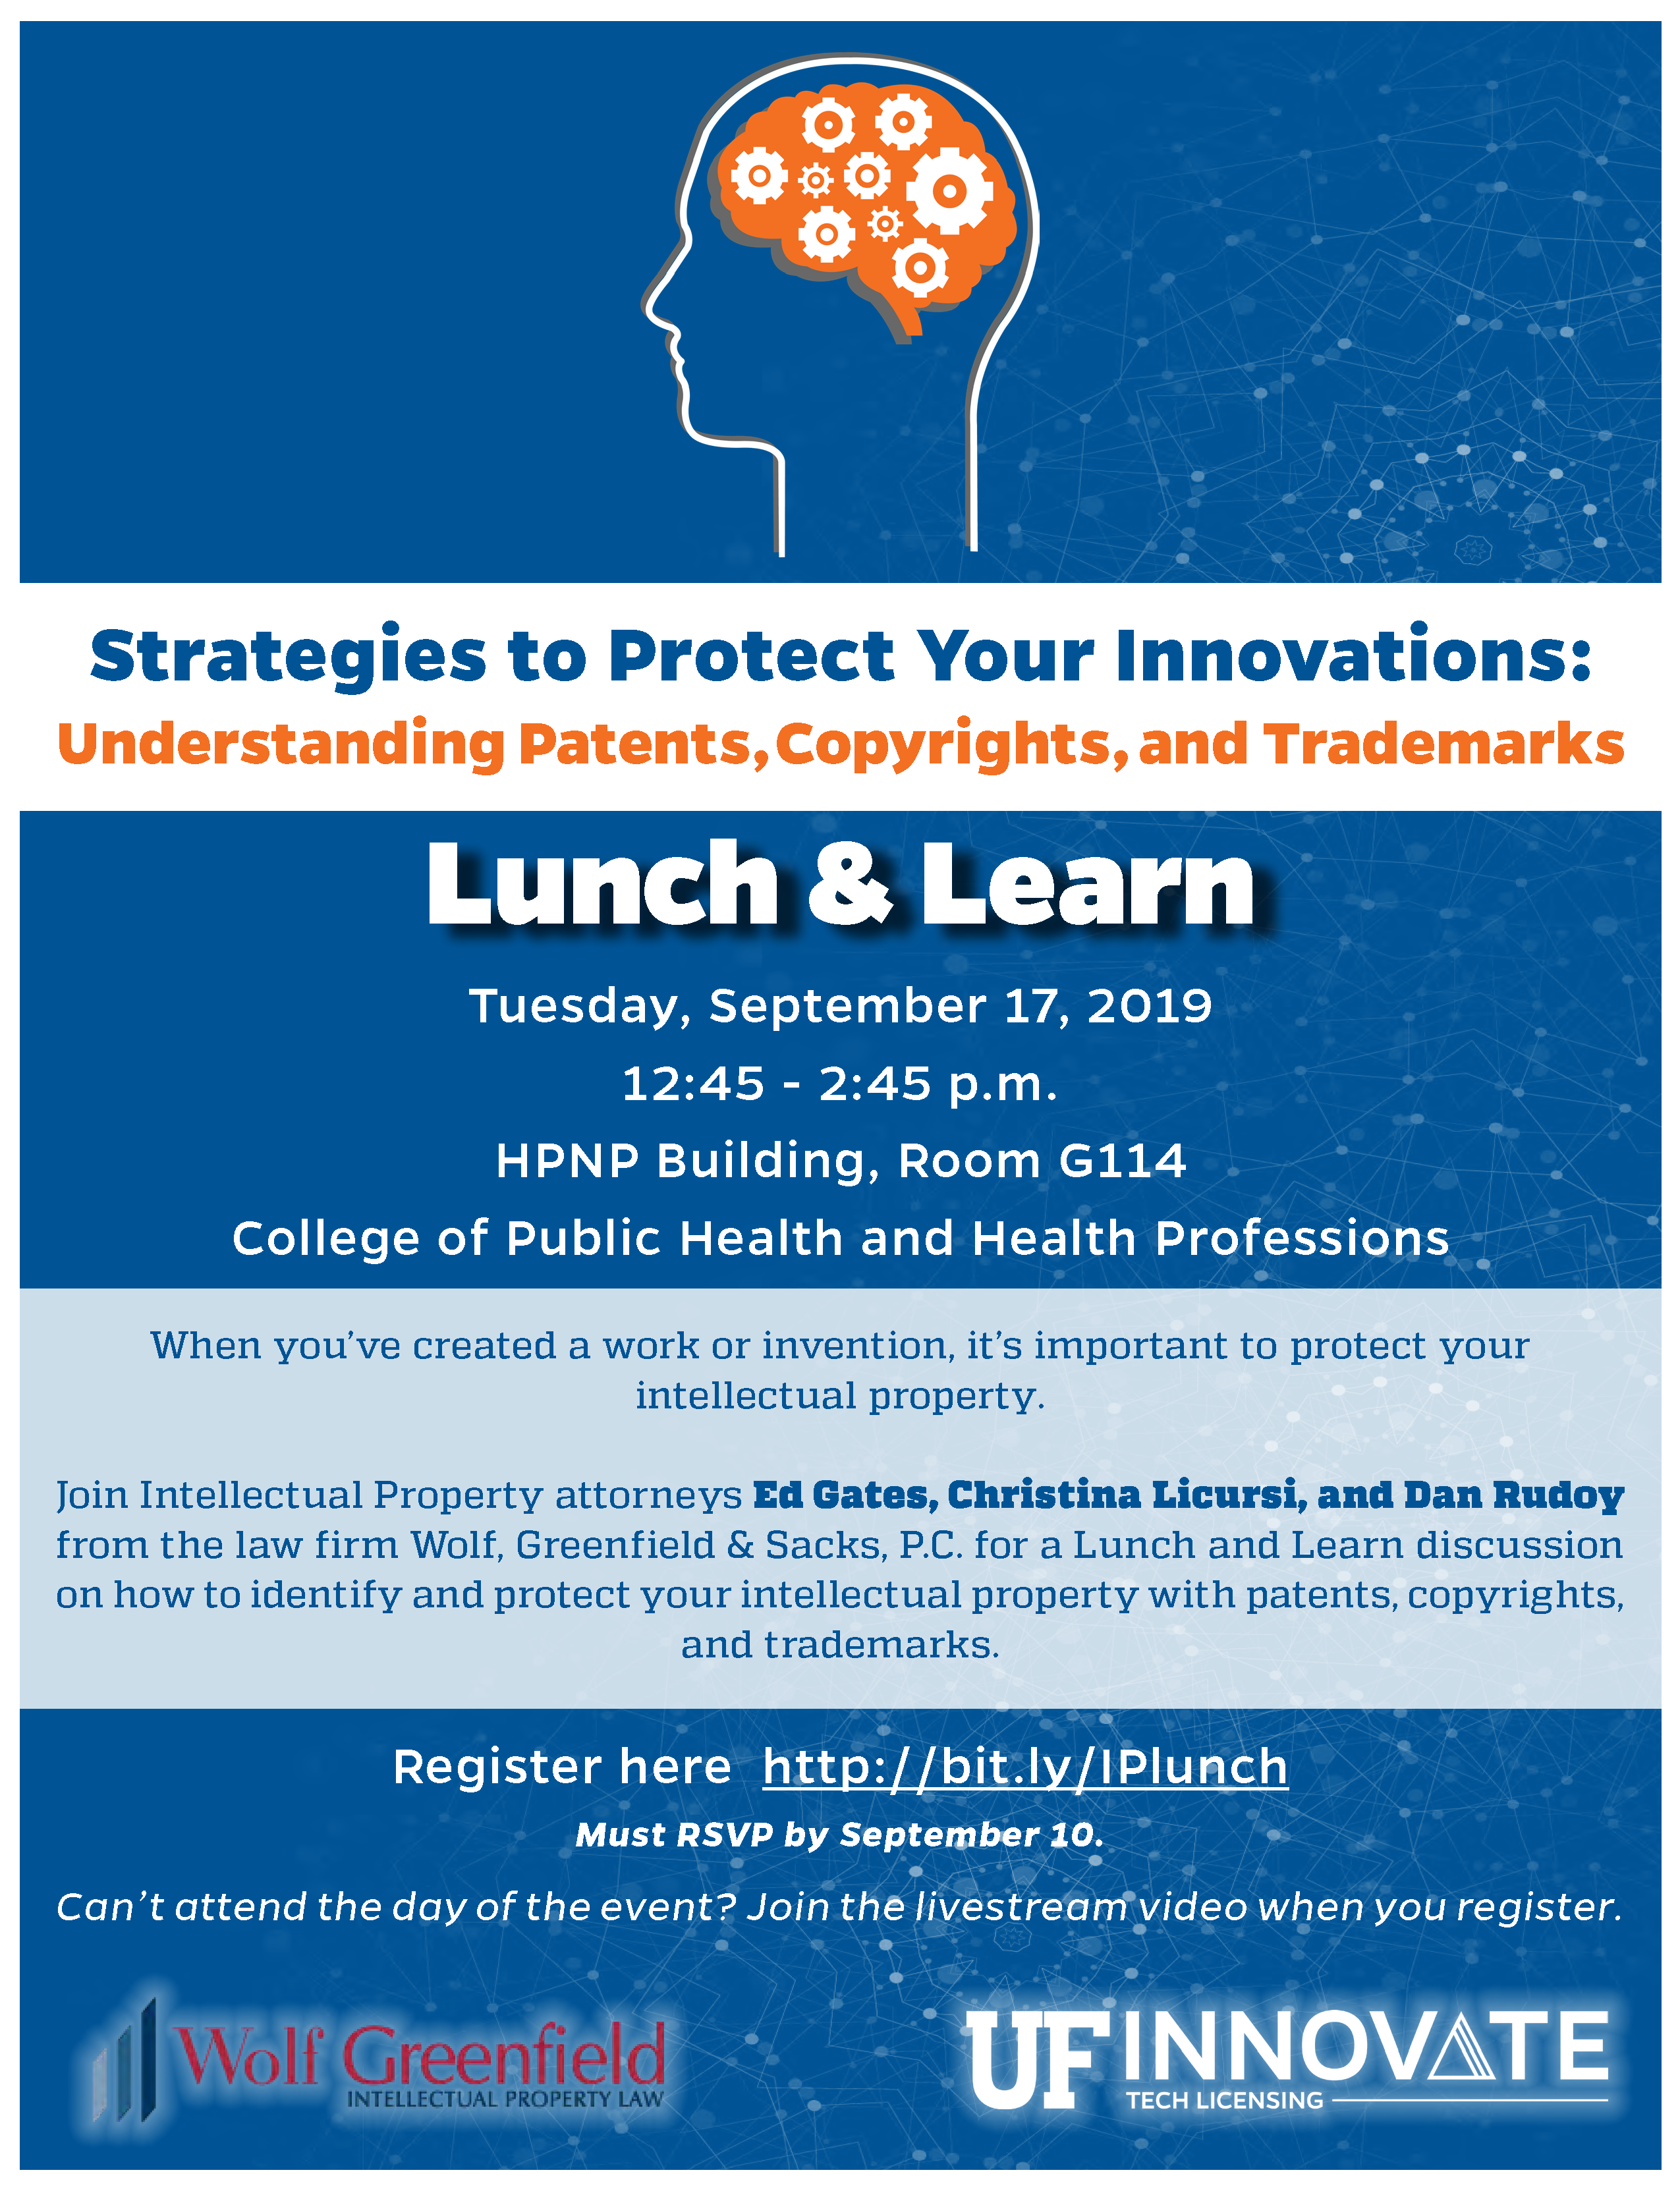 Lunch & Learn - Strategies to Protect Your Innovations - UF Innovate